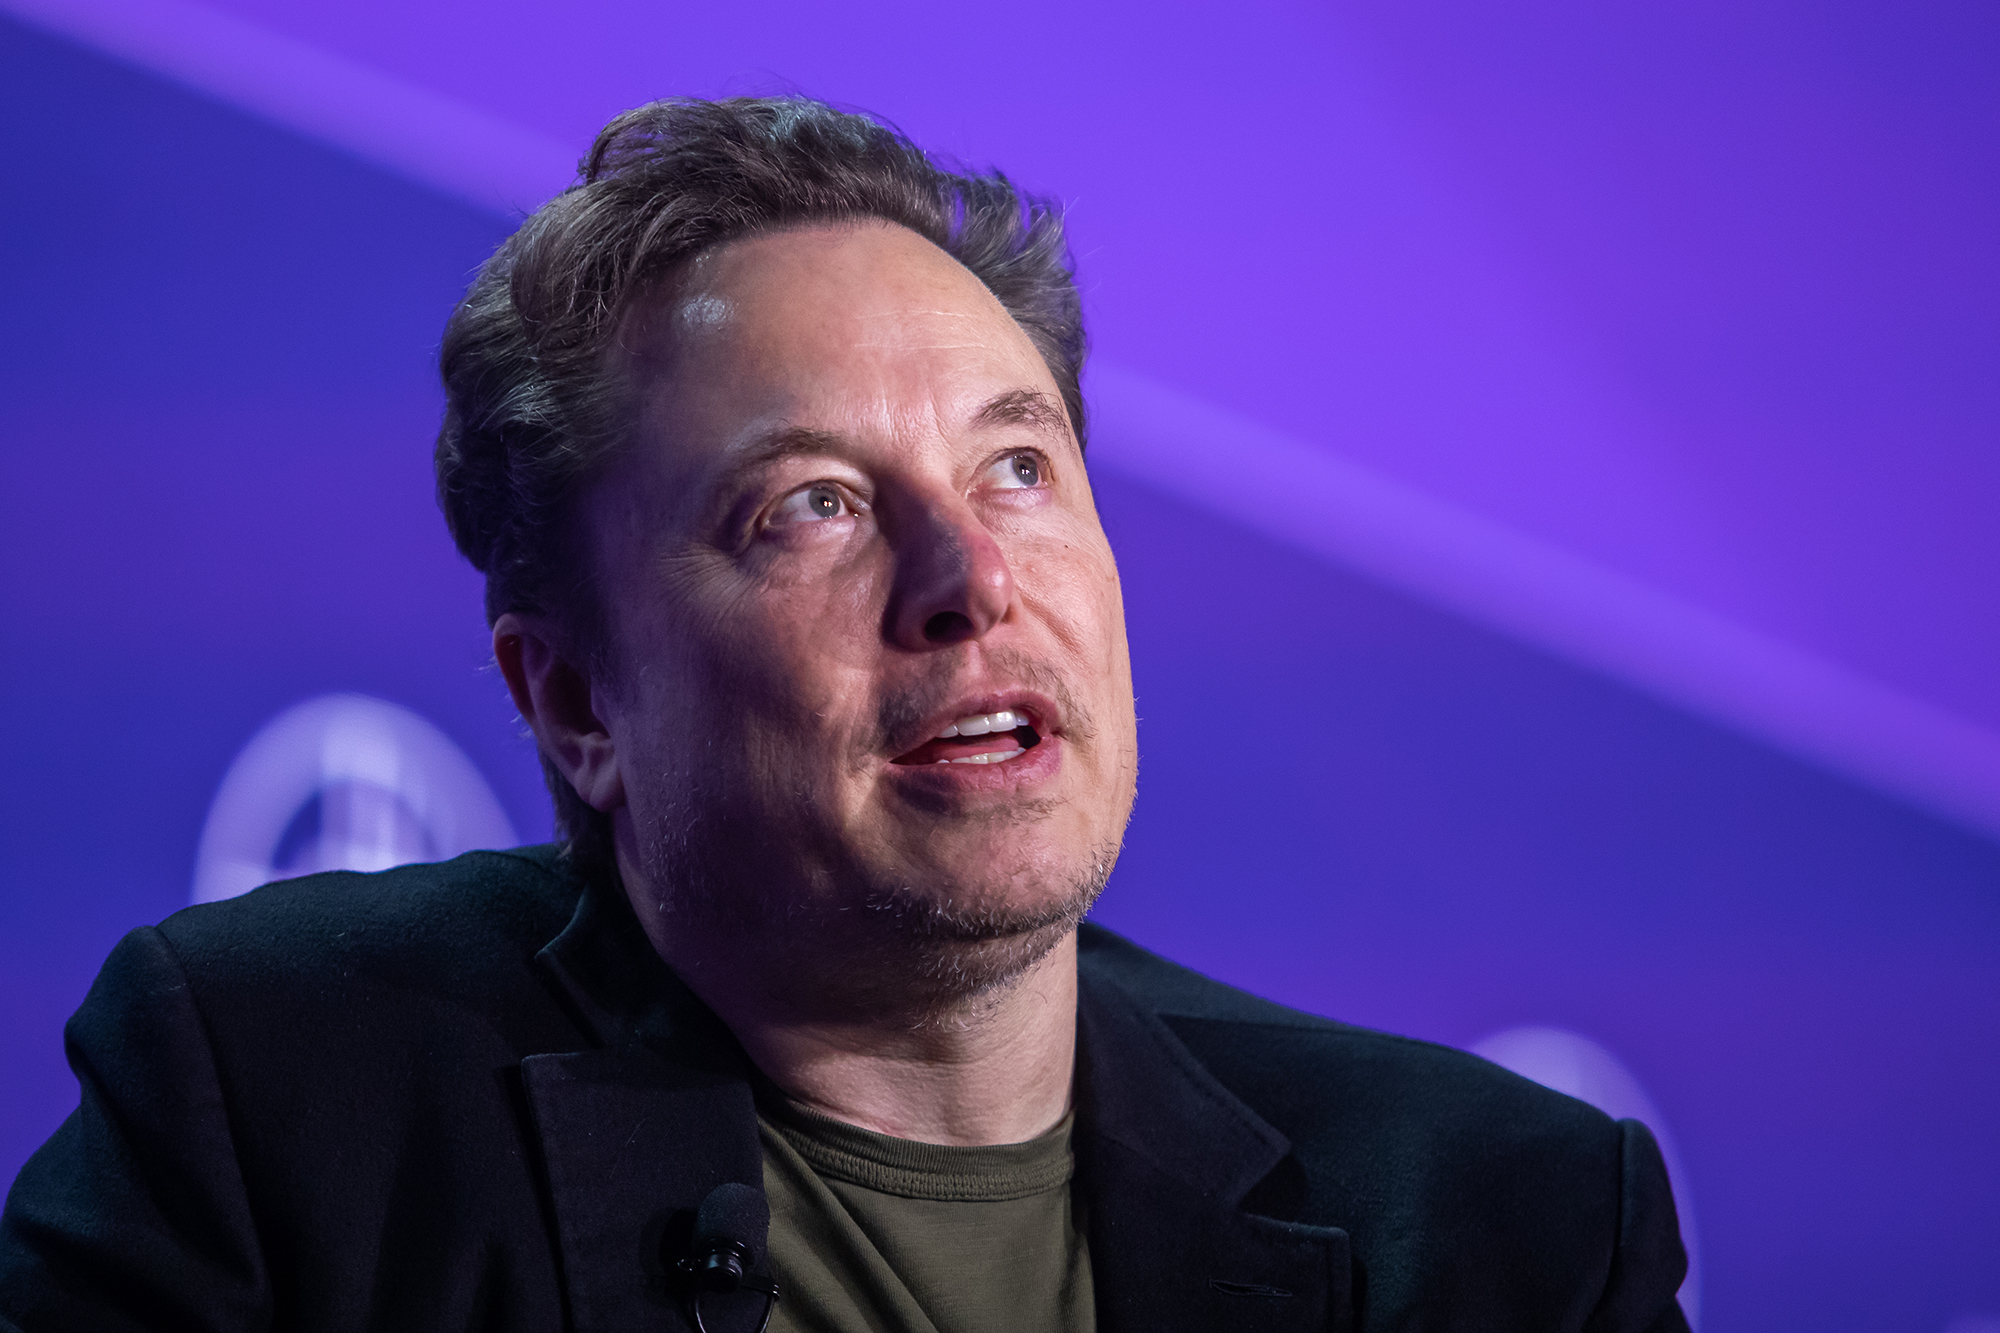 Elon Musk Faces Accusations in $7.5 Billion Insider Trading Lawsuit